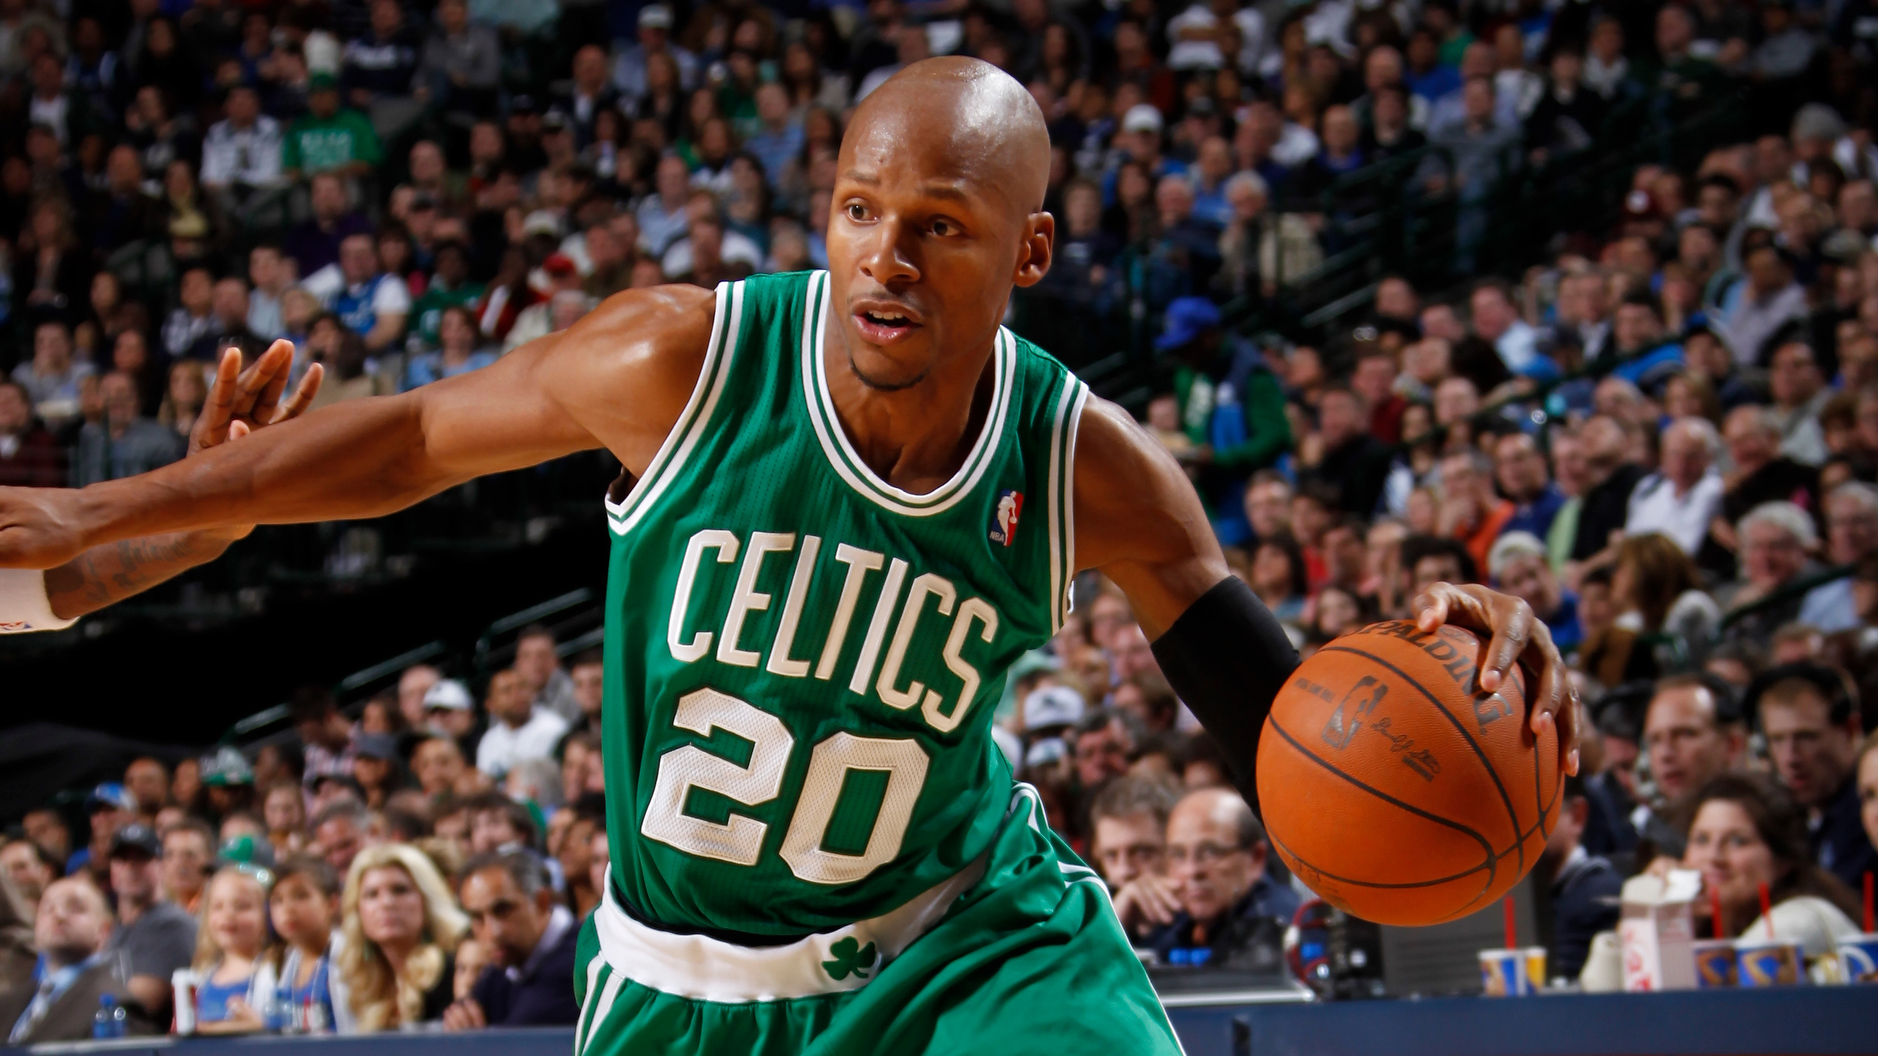 Ray Allen at the peak of a perfect jumpshot.